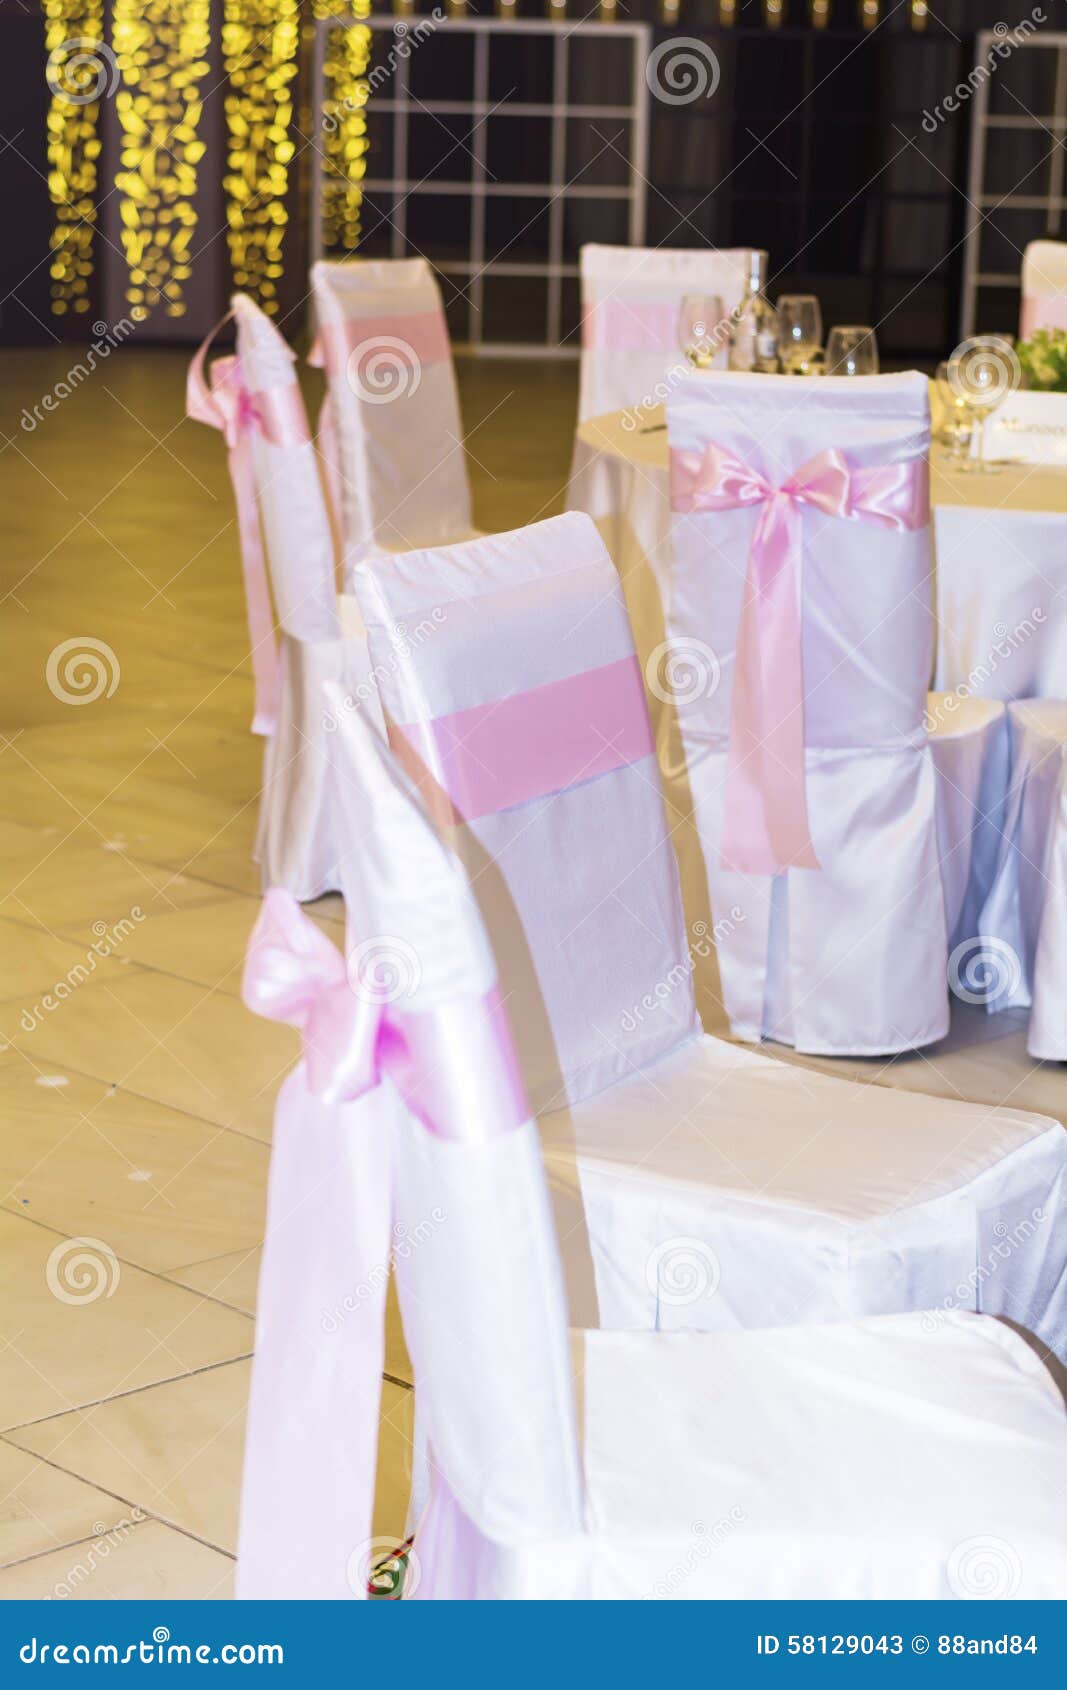 Wedding Chairs With Pink Ribbons Stock Image Image Of Bows